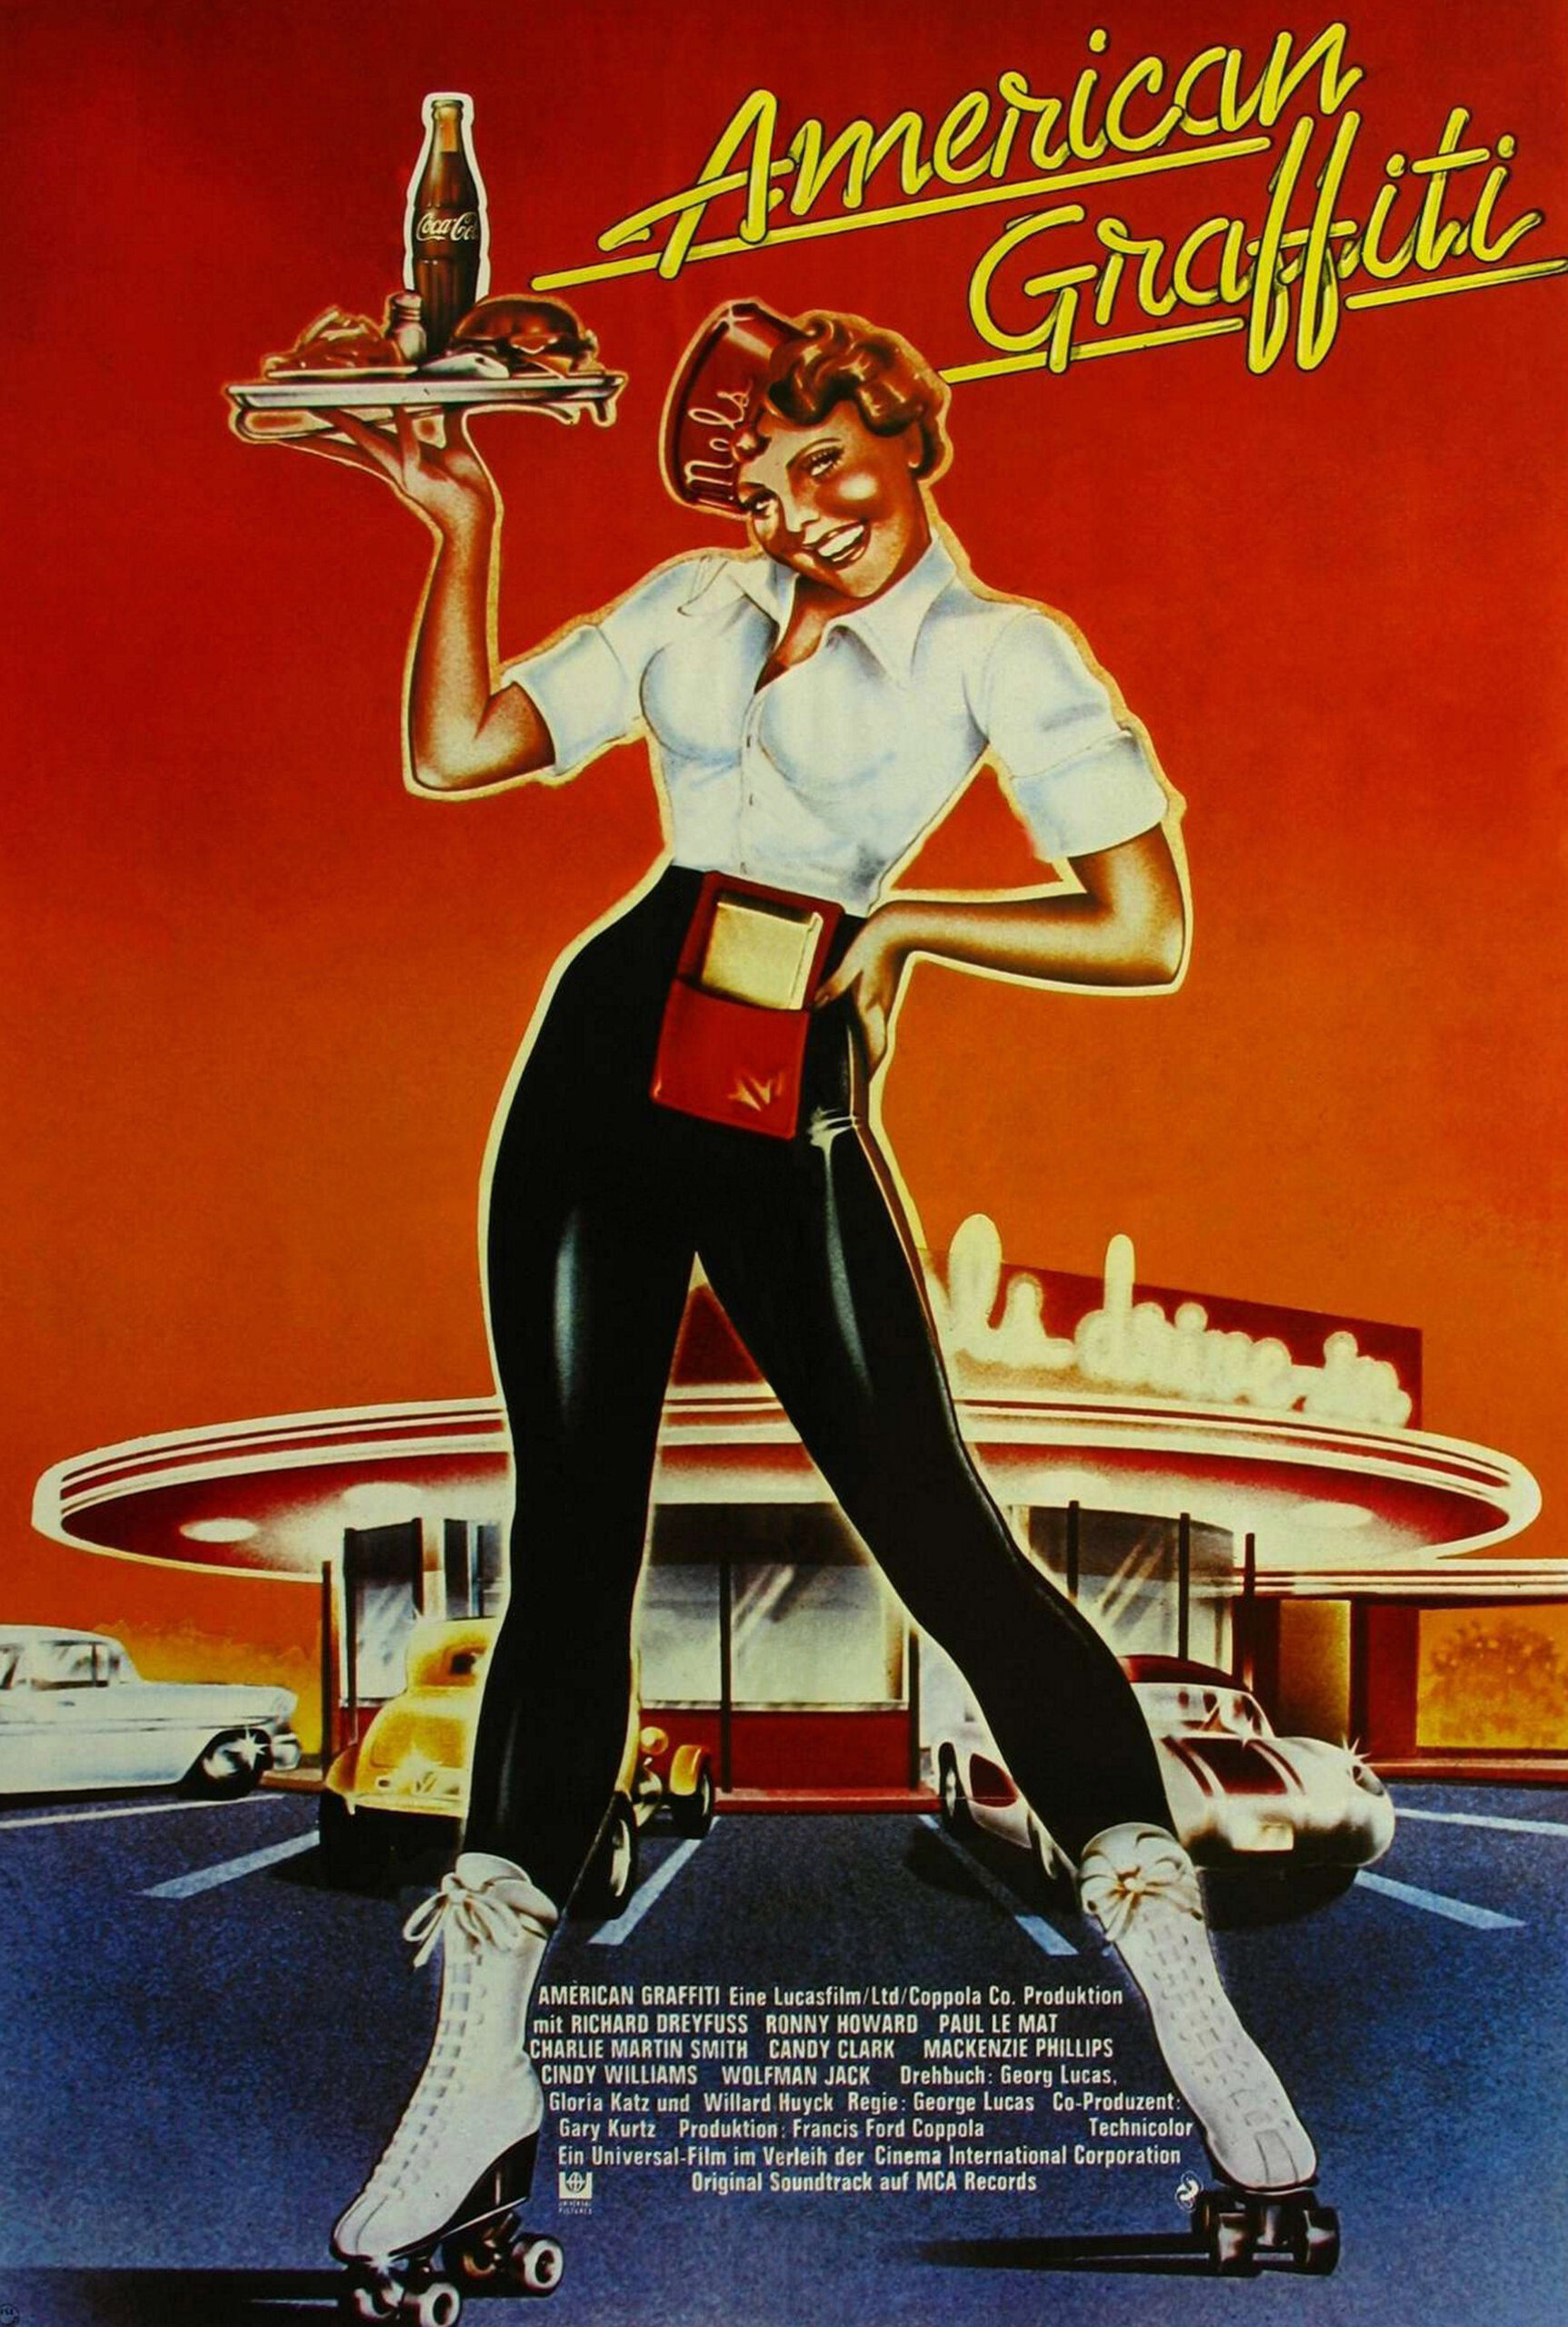 poster art for the 1973 movie "American Graffiti." It is an illustrated poster. At top is the film's title, designed in neon lettering like the type seen at an early 1960s drive-in. Below that is a large illustration of a female carhop wearing roller skates standing in the parking lot of a drive-in. She is smiling and holding up a tray containing a burger, fries and a bottle of Coke in her right hand. Behind her, two 1960s-era cars are parked at the main building of the drive-in, whose name, Mel's Drive-In, is featured in neon lettering on the building's side.